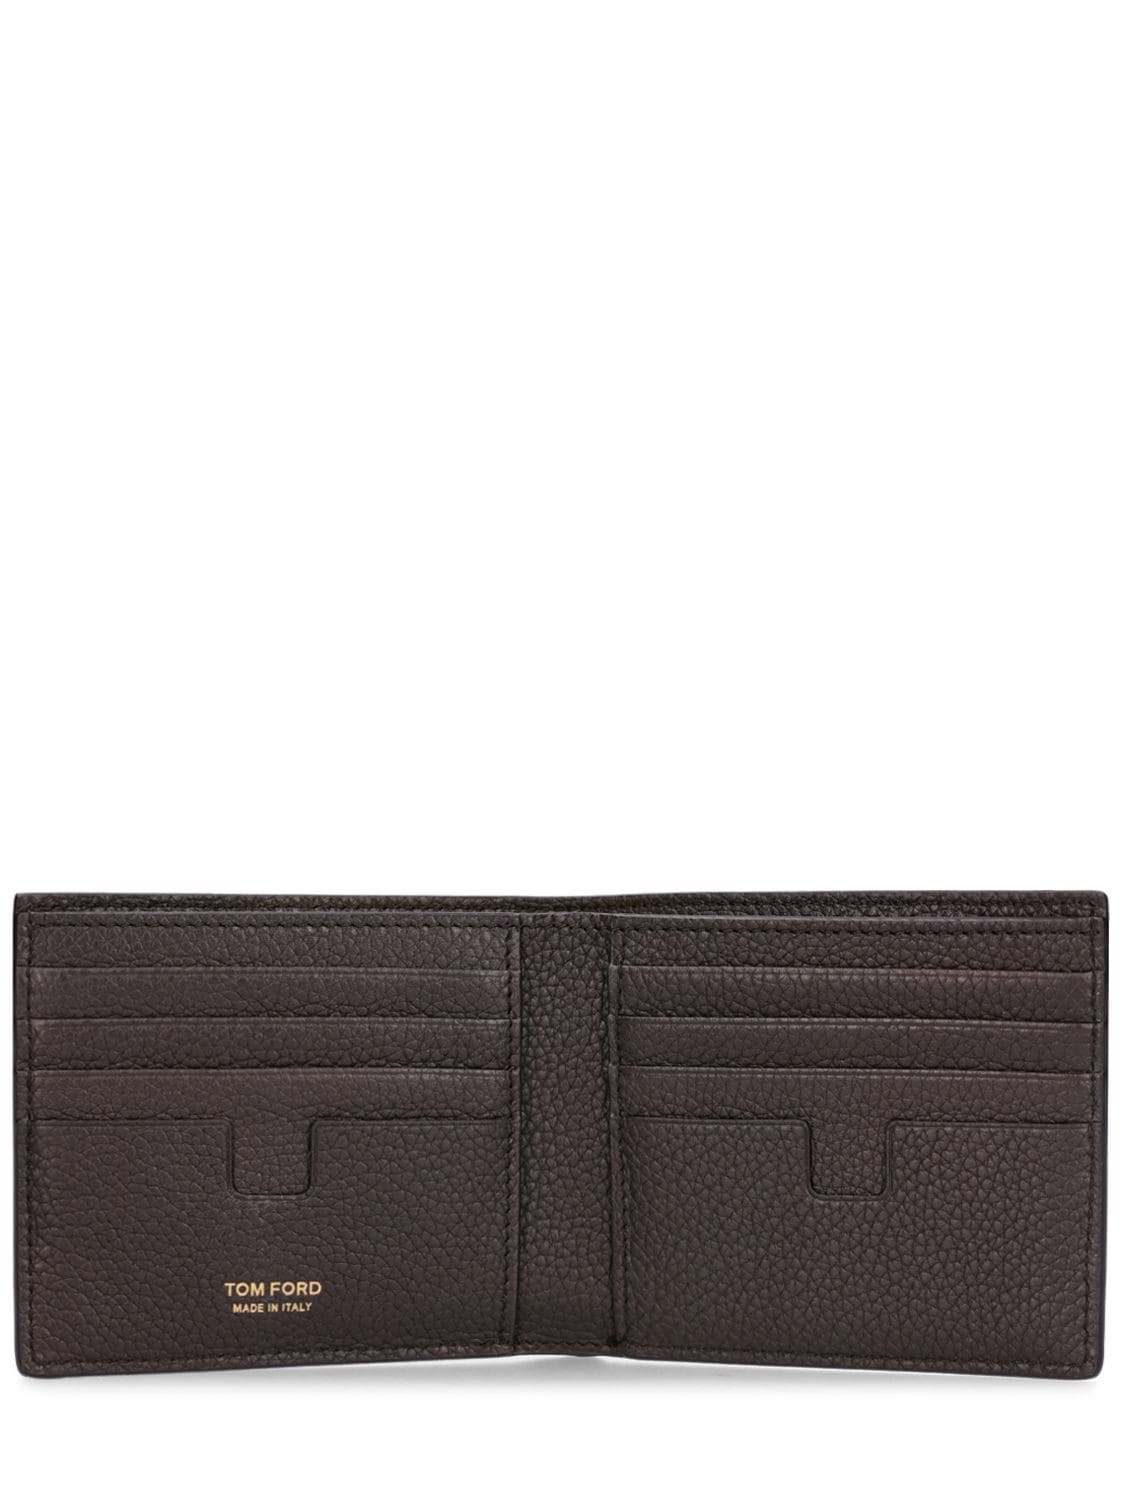 Shop Tom Ford Soft Grain Leather Wallet In Chocolate